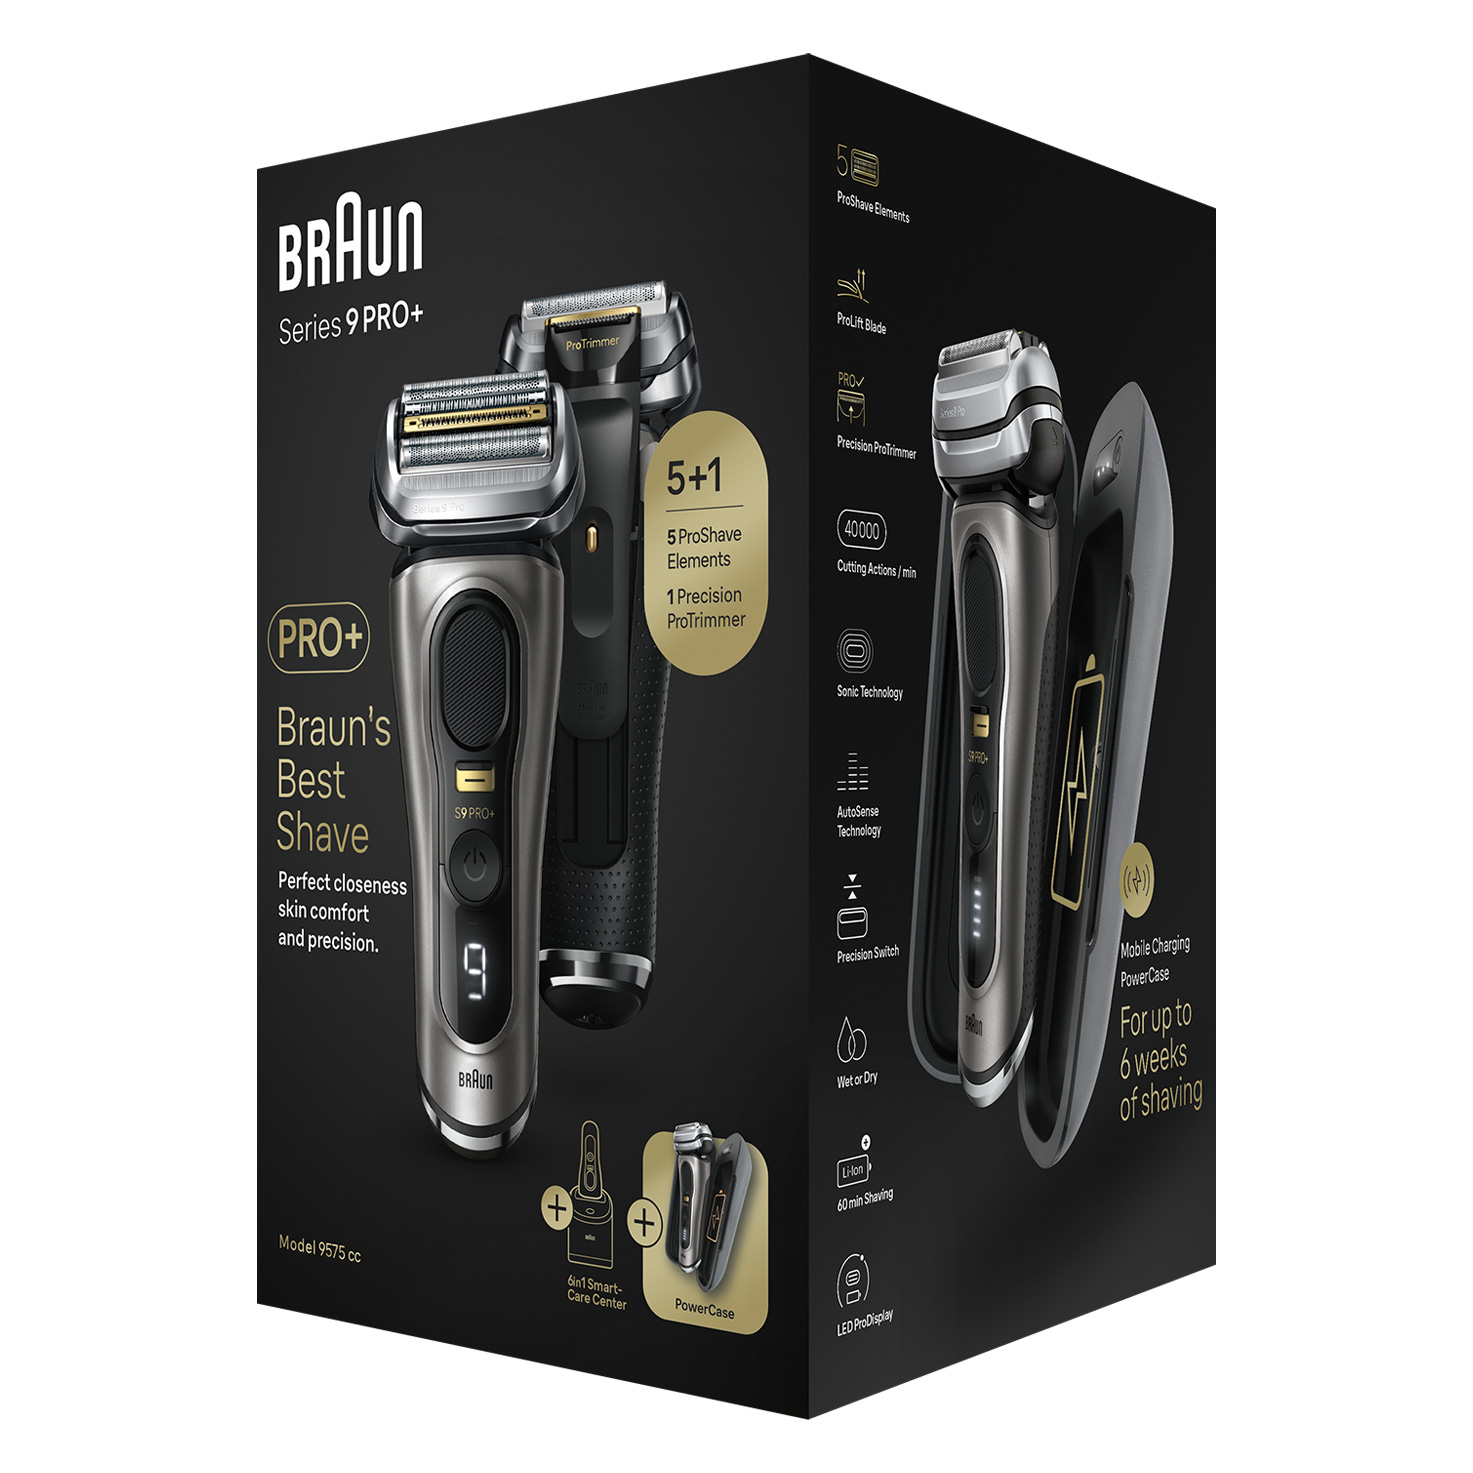 Braun Series 9 UK with Electric | Shaver Pro+ Braun ProTrimmer